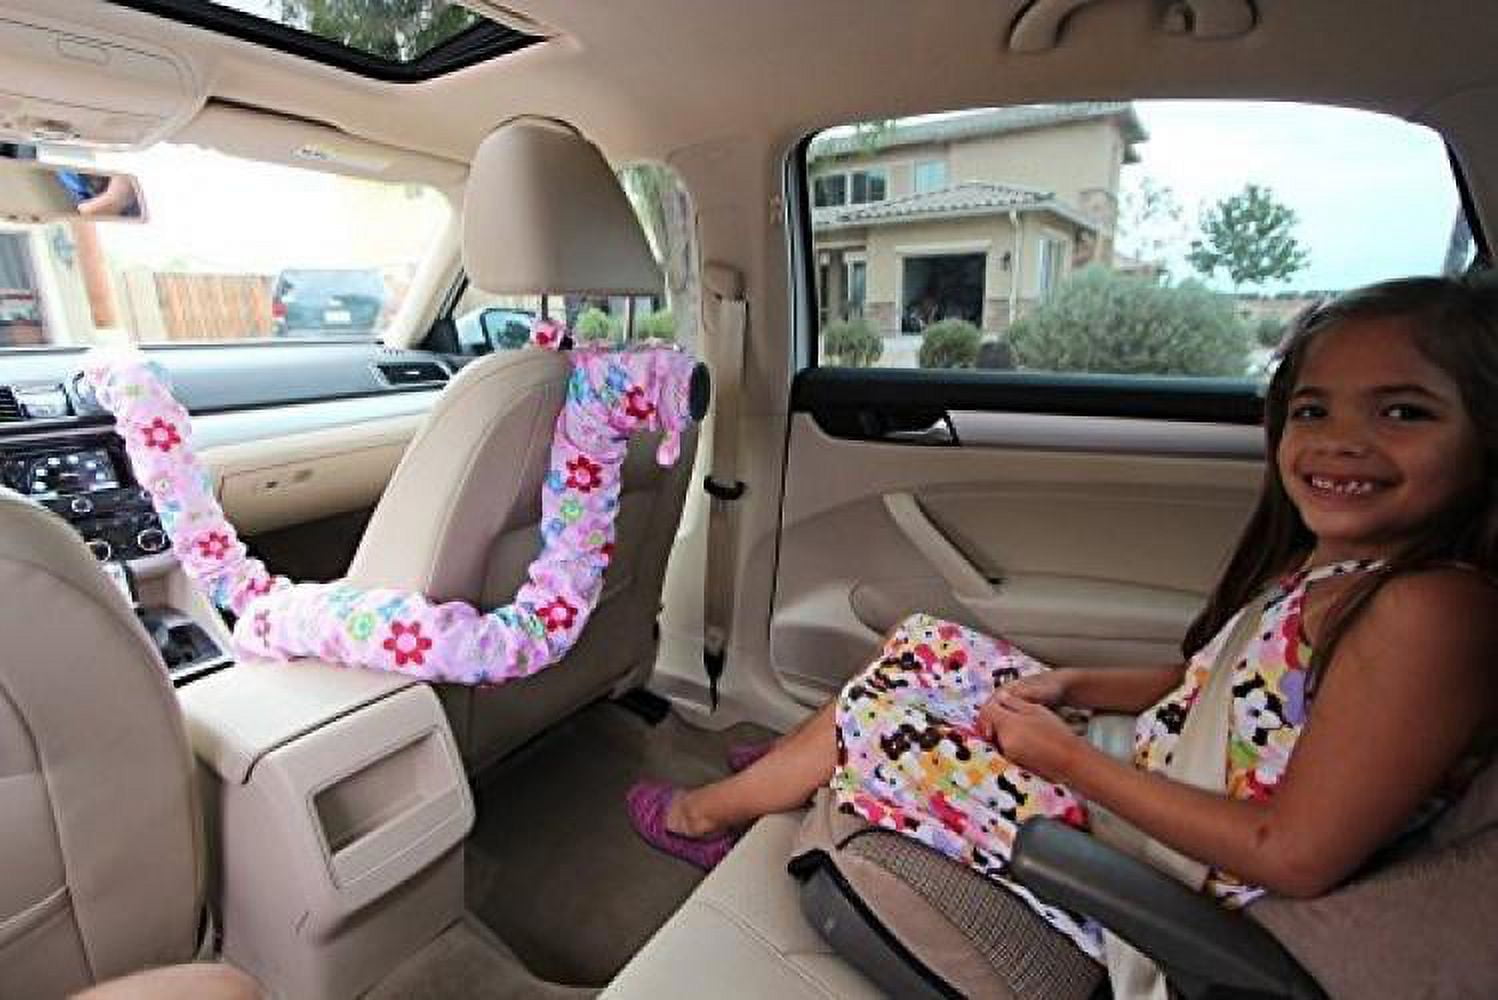 Noggle Extend Your Air Conditioning or Heat to Your Kids Instantly (8 Feet,  Black Ice)